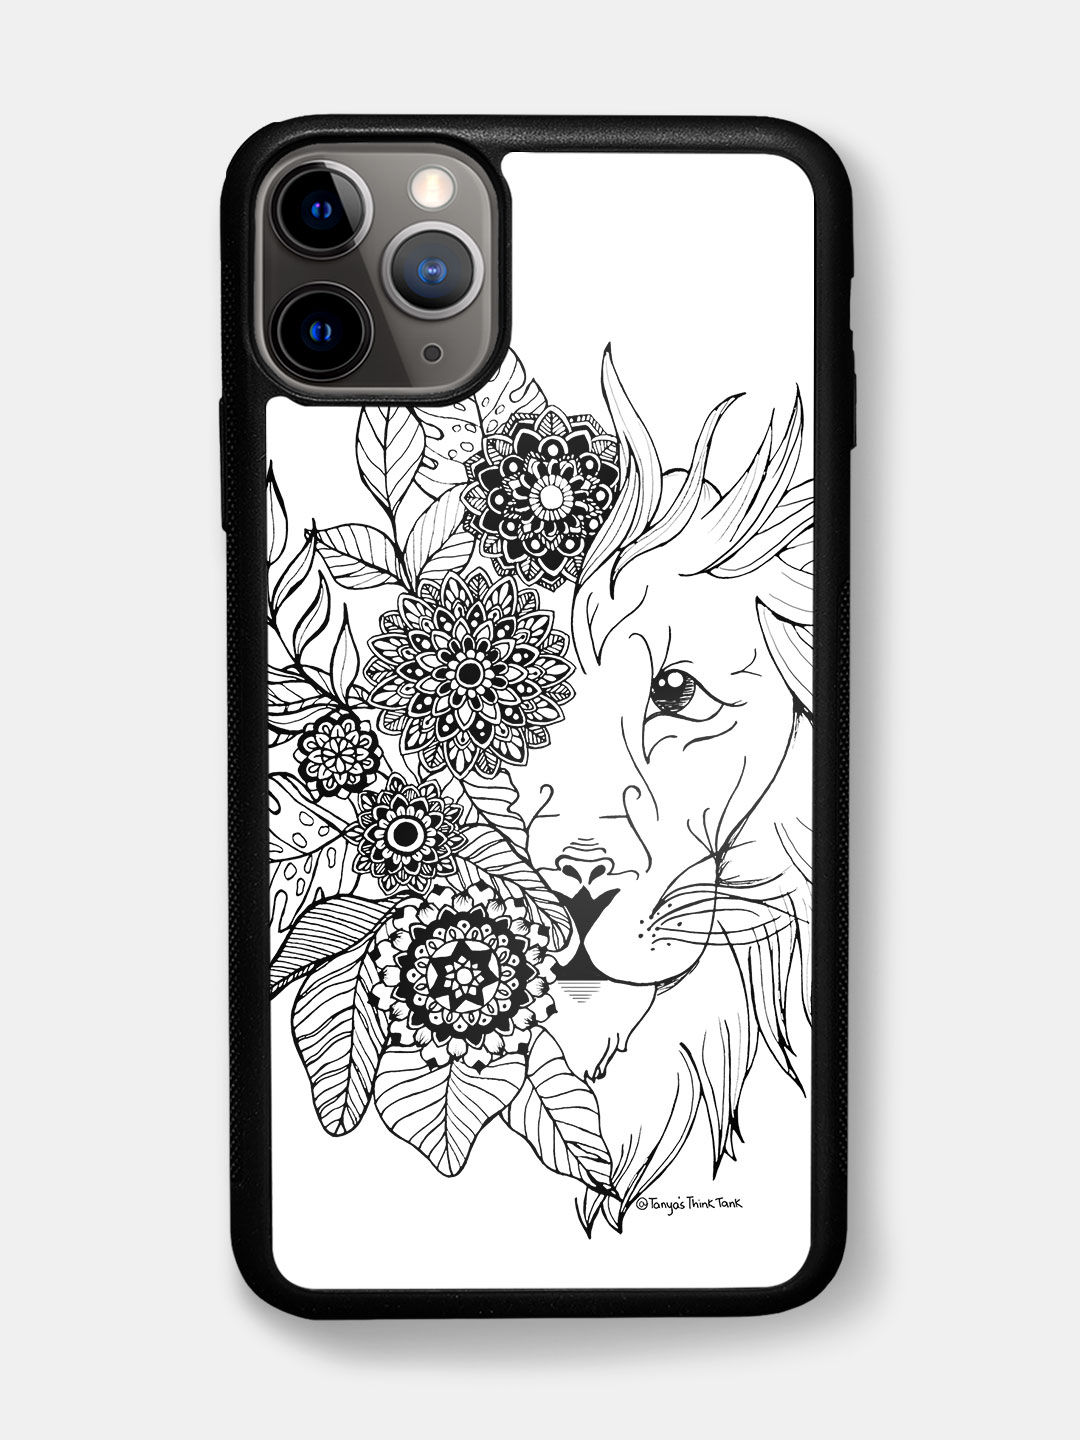 Buy Lion - Bumper Phone Case for iPhone 11 Pro Phone Cases & Covers Online